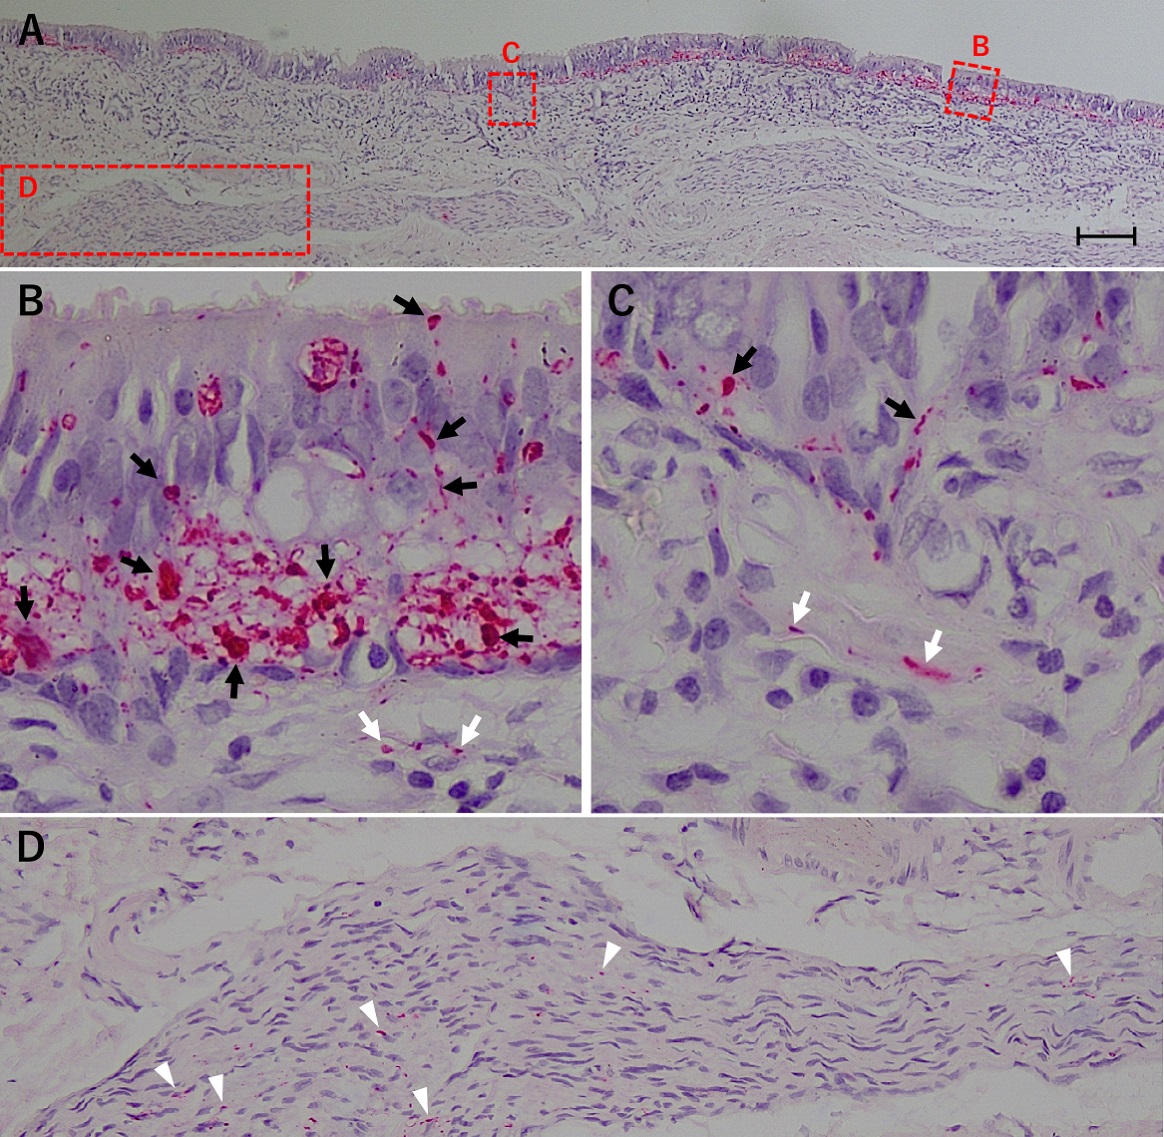 A Histochemical Analysis of Neurofibrillary Tangles in Olfactory Epithelium, a Study Based on an Autopsy Case of Juvenile Alzheimer’s Disease